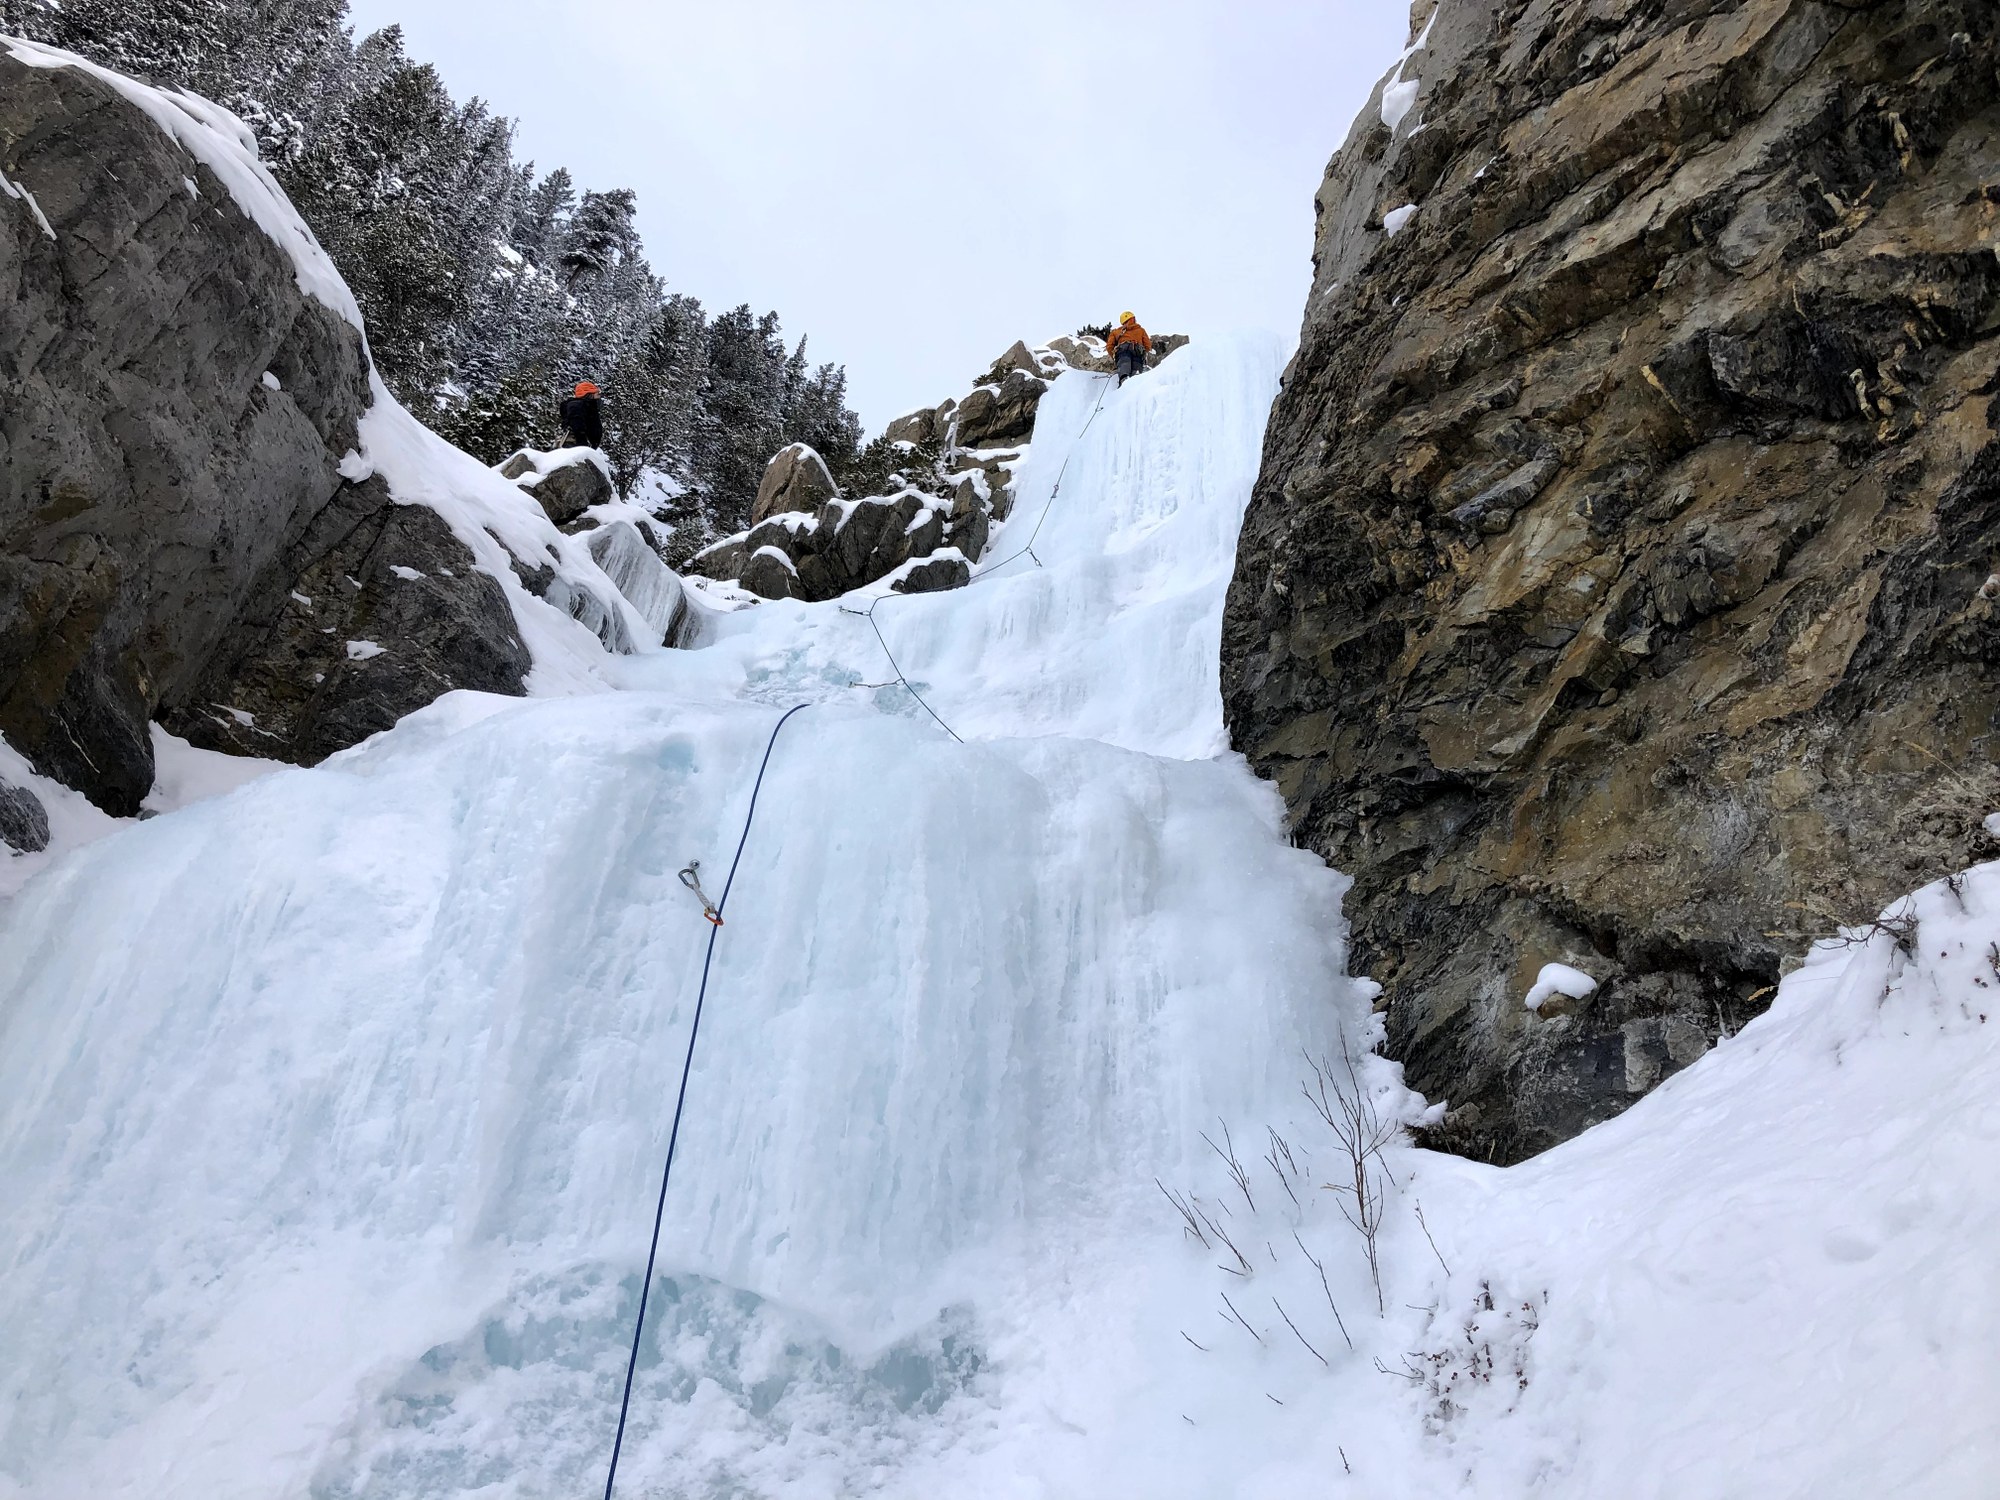 Safety Stories: Ice Pitch Top-Rope Anchor Would Have Been Worrisome, Had We Known The Mountaineers